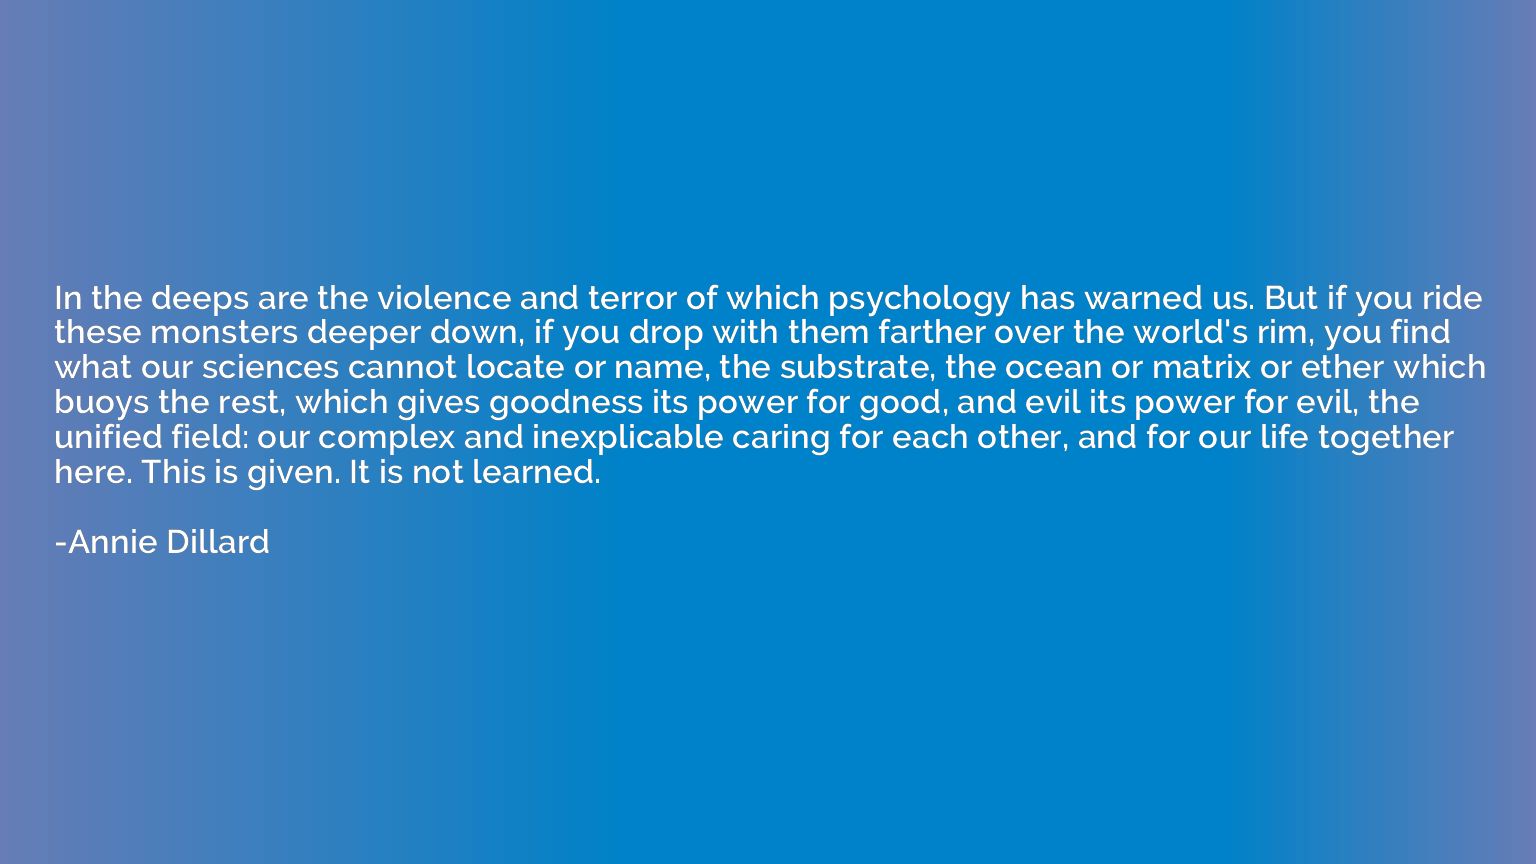 In the deeps are the violence and terror of which psychology